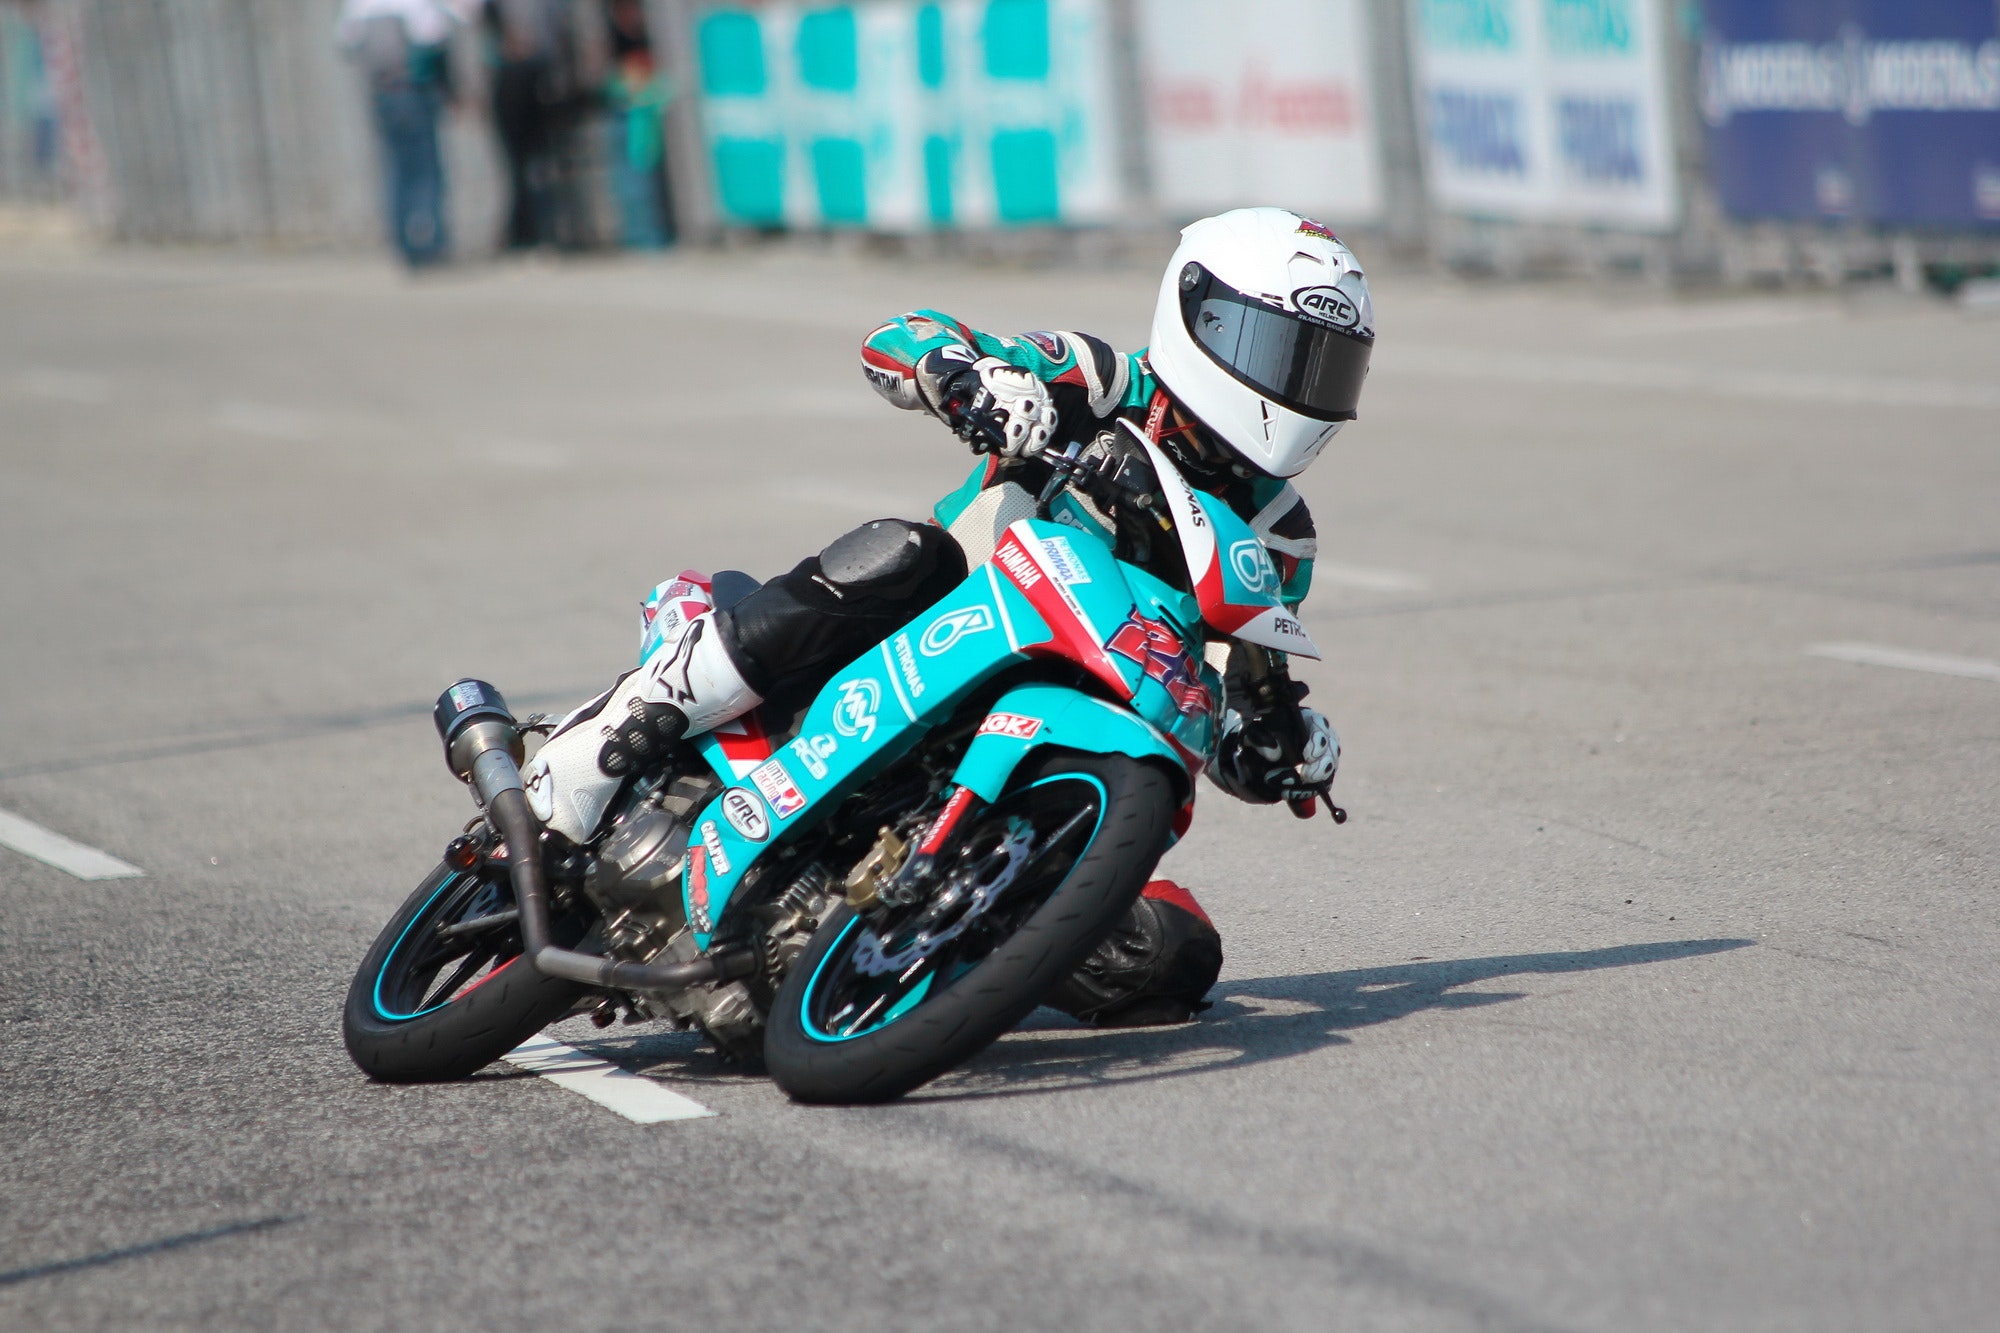 Biker Riding a Teal Sport Bike, Action, Motorcycle, Thrill, Sport, HQ Photo